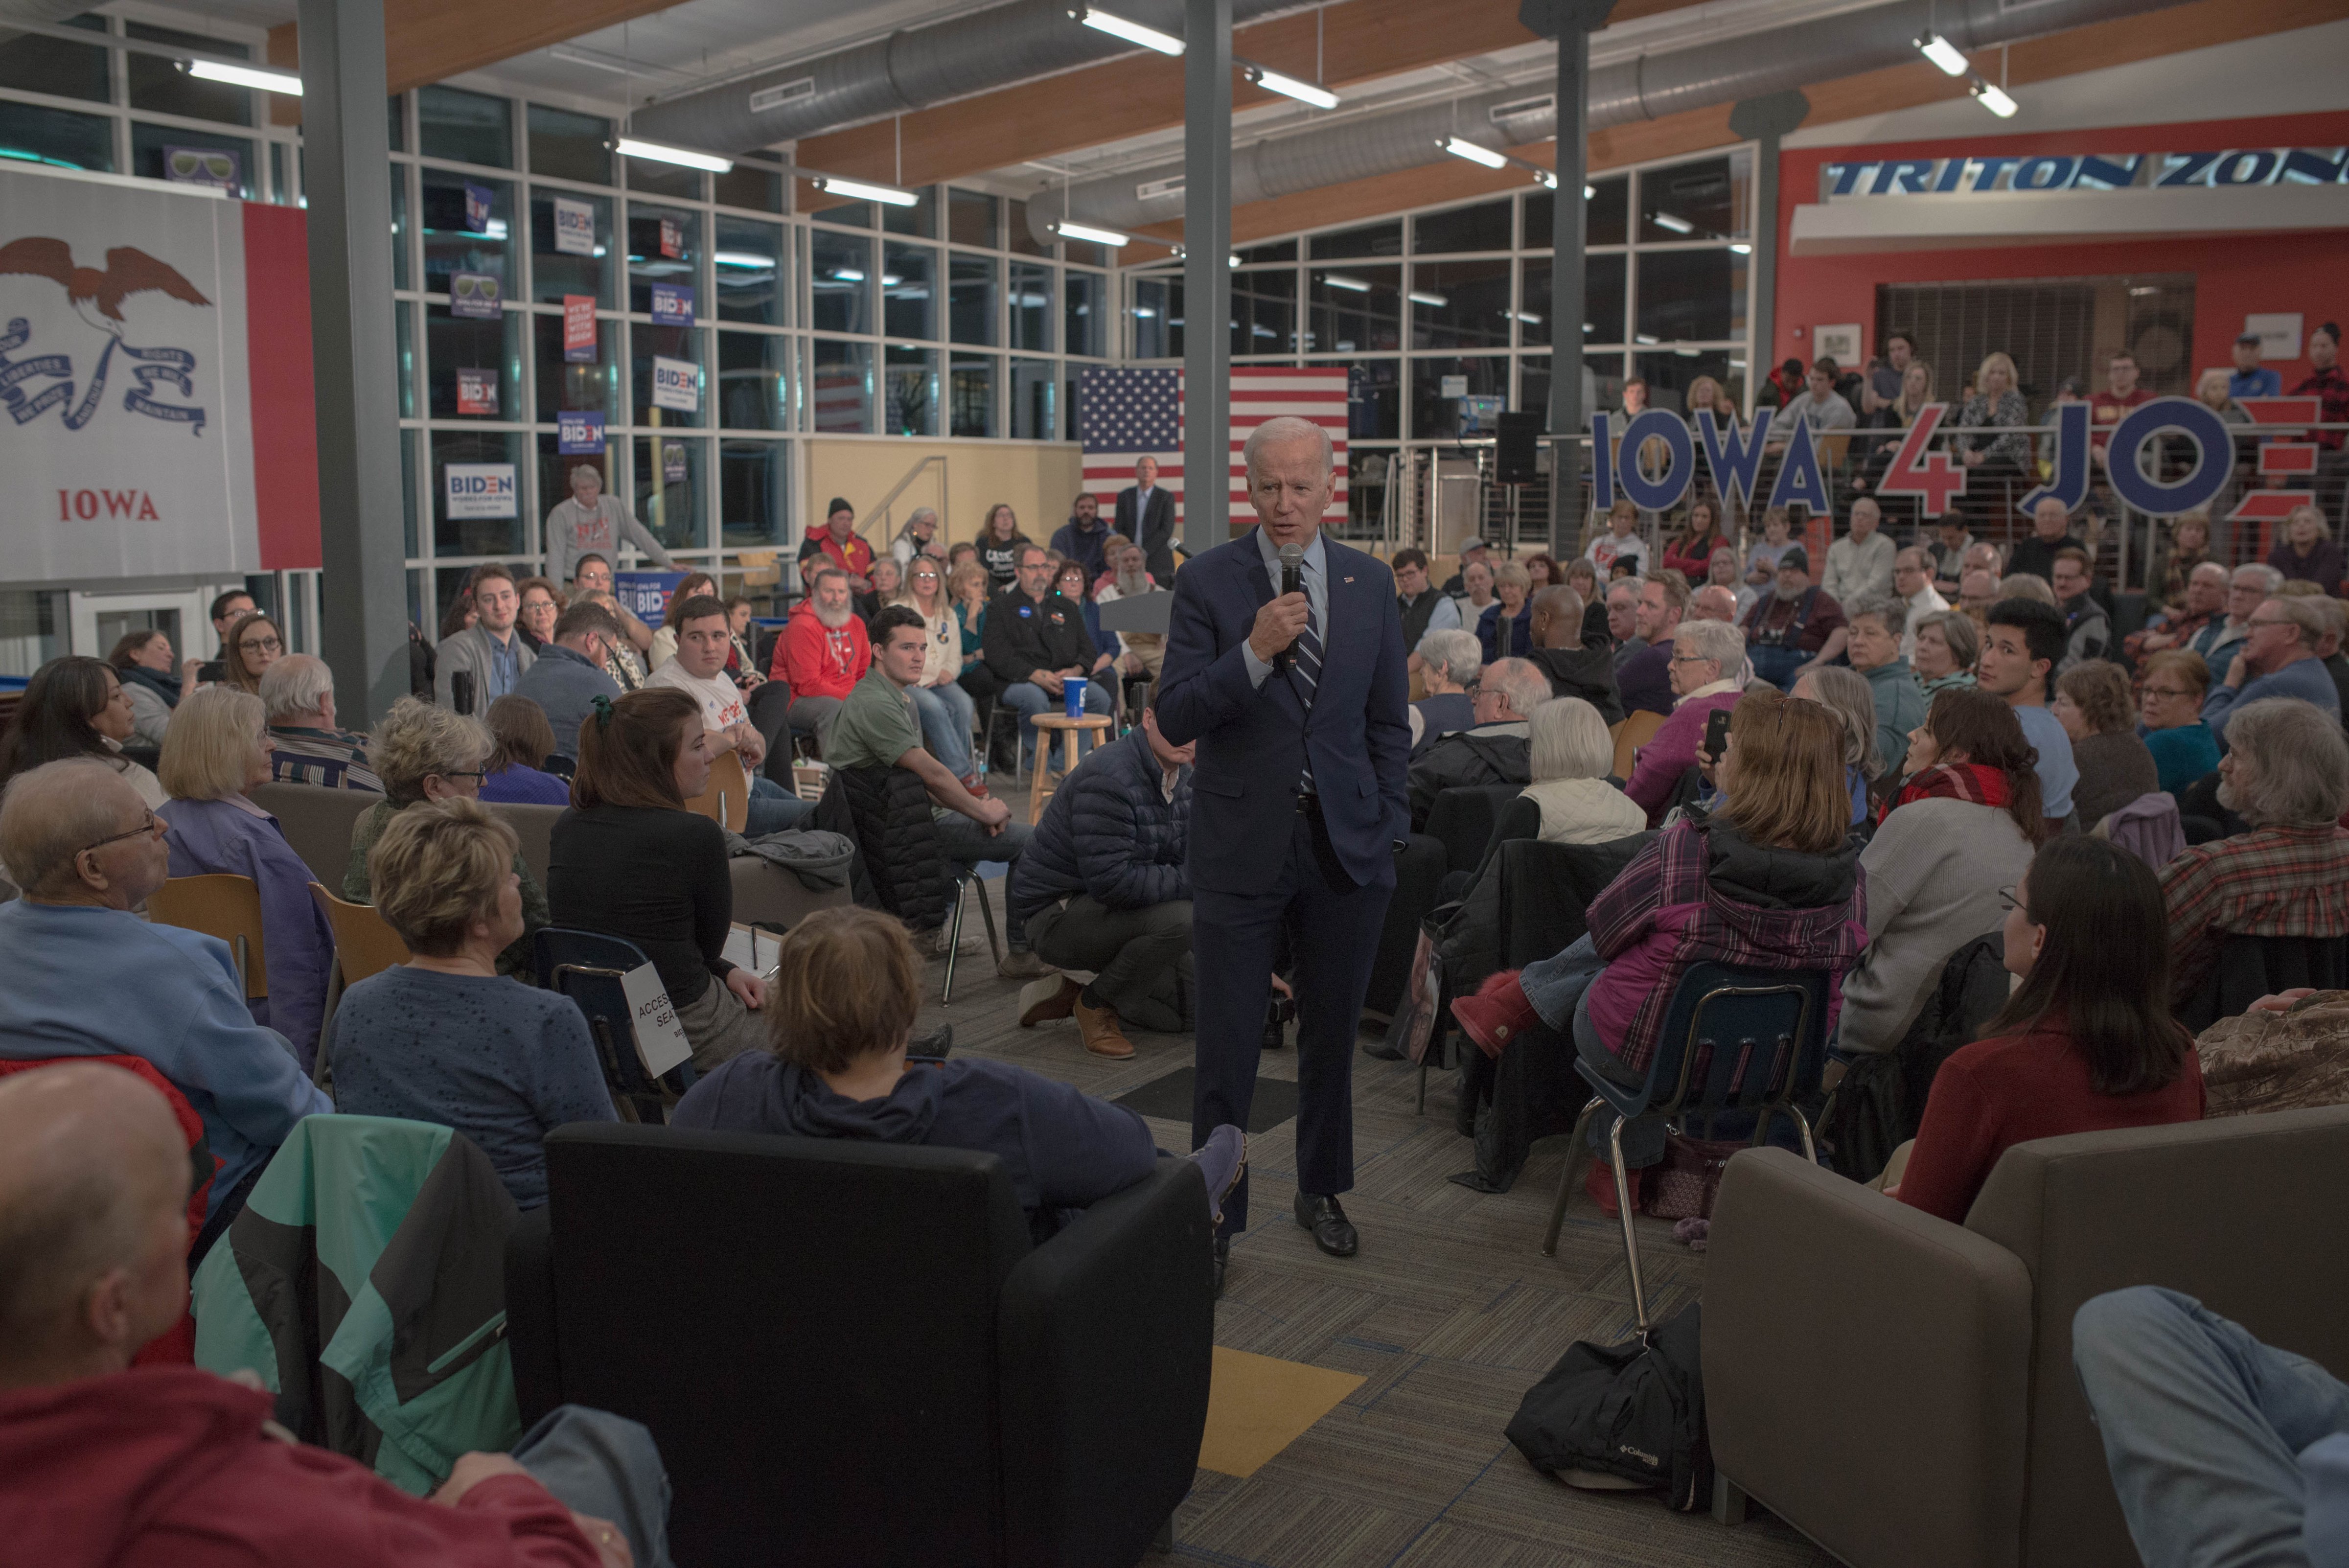 Presidential candidate, former Vice President Joe Biden  during a community event in Fort Dodge, Iowa, Jan. 21, 2020. (September Dawn Bottoms for TIME)